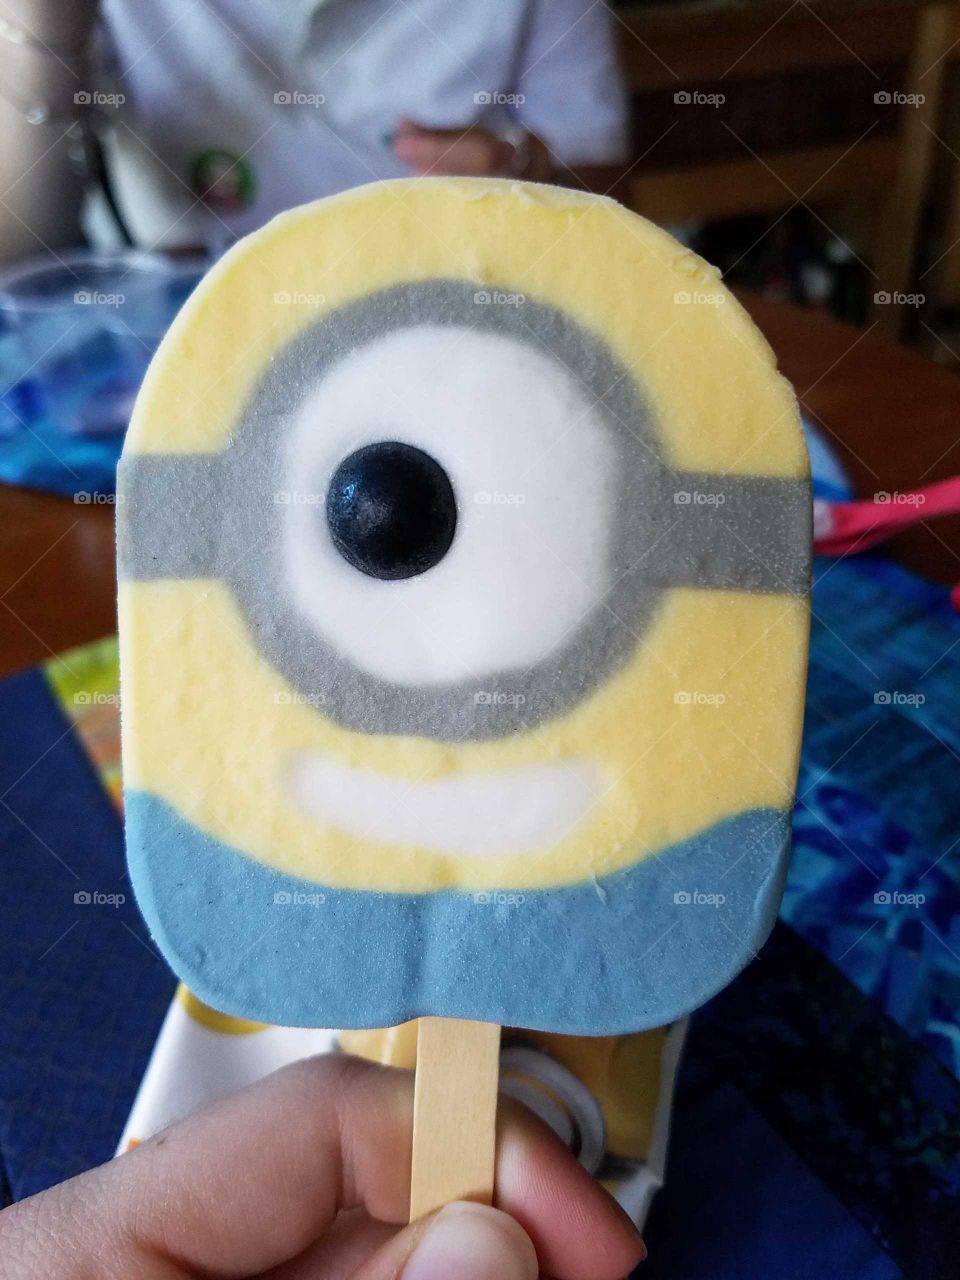 Minion popsicle from an ice cream truck